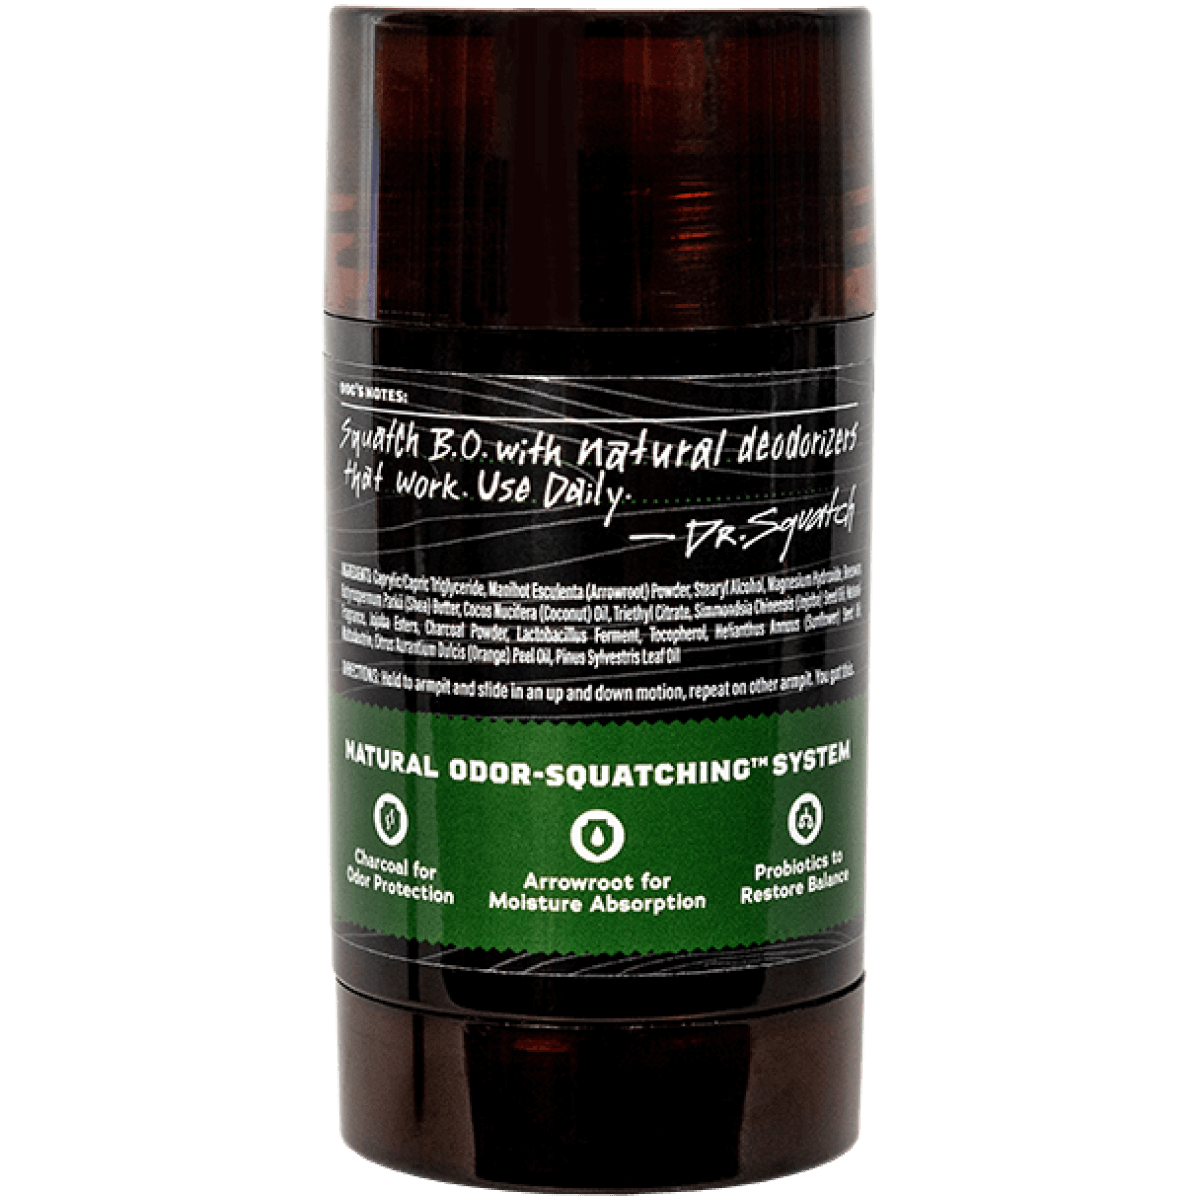 Men's Natural Deodorant - Aluminum-Free Deodorant from Dr. Squatch - Natural Deodorizer - Made w/Charcoal - Deodorant for Men - Smell Fresh with